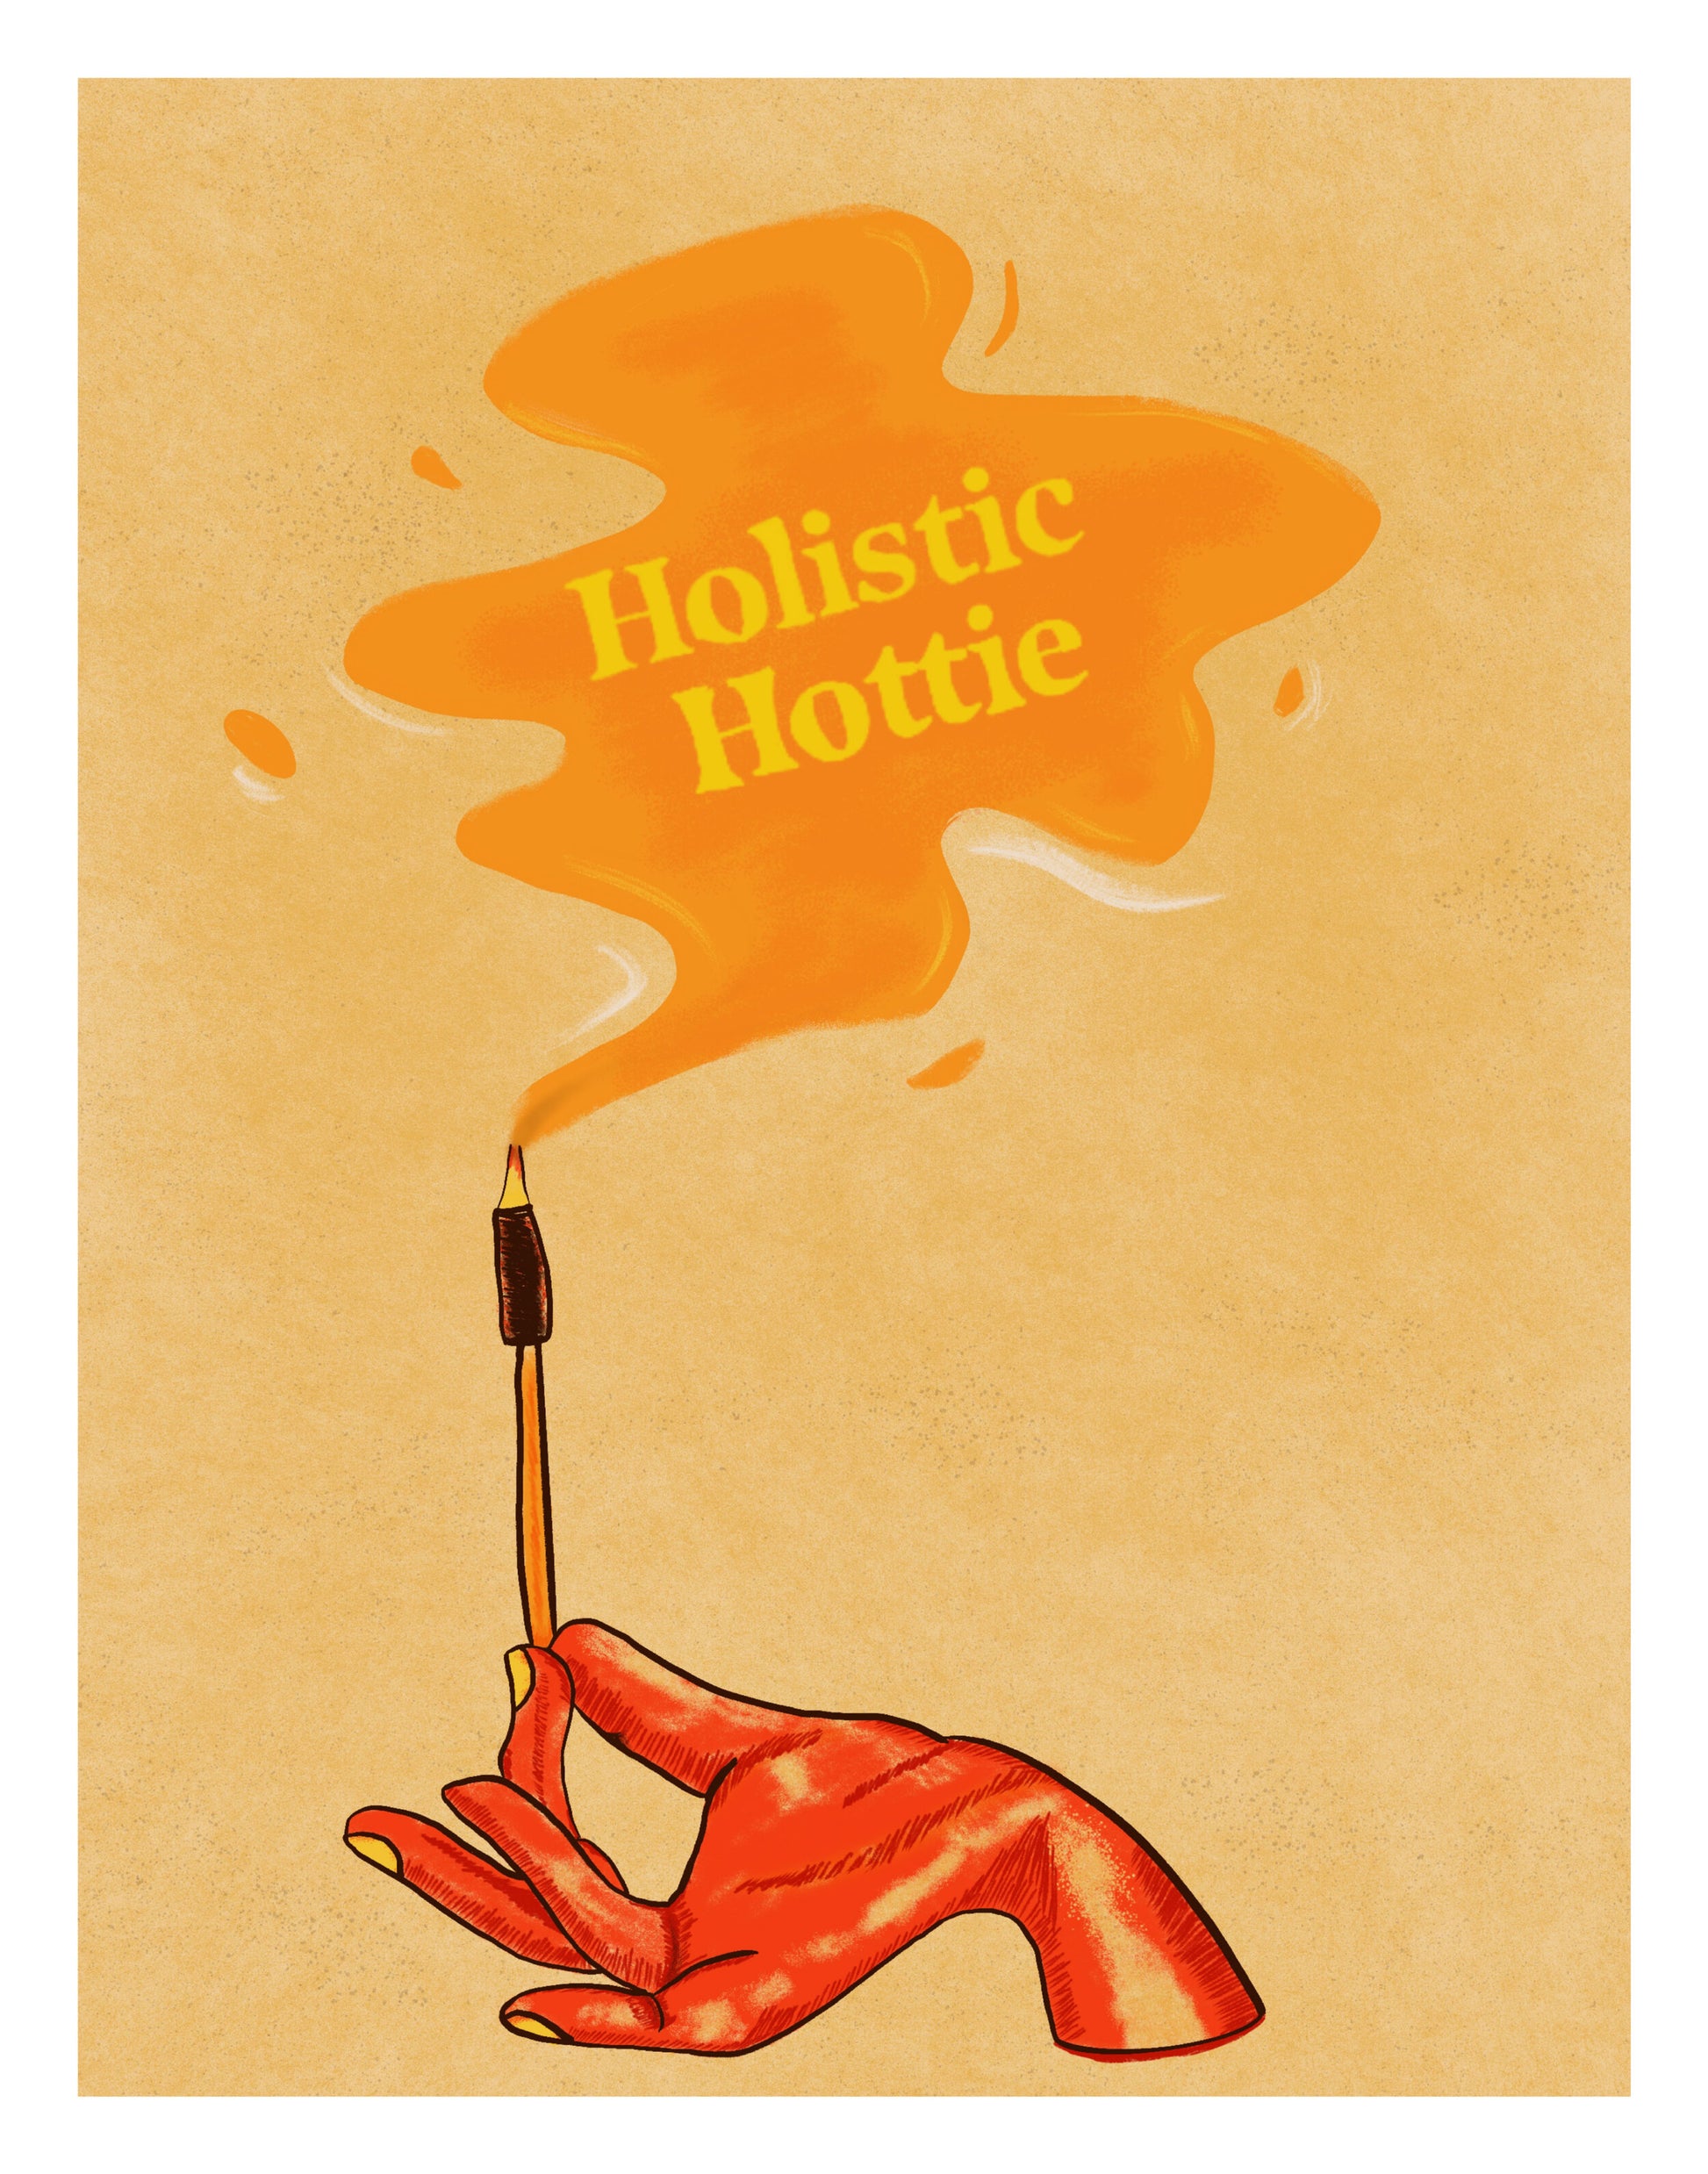 Holistic Hottie 11x14” art print from Goods Made By Digitrillnana, Ashley Fletcher. Spiritual, Sage, Incense art. Perfect for home decor, wall art, art prints, and more! Black Woman Owned.